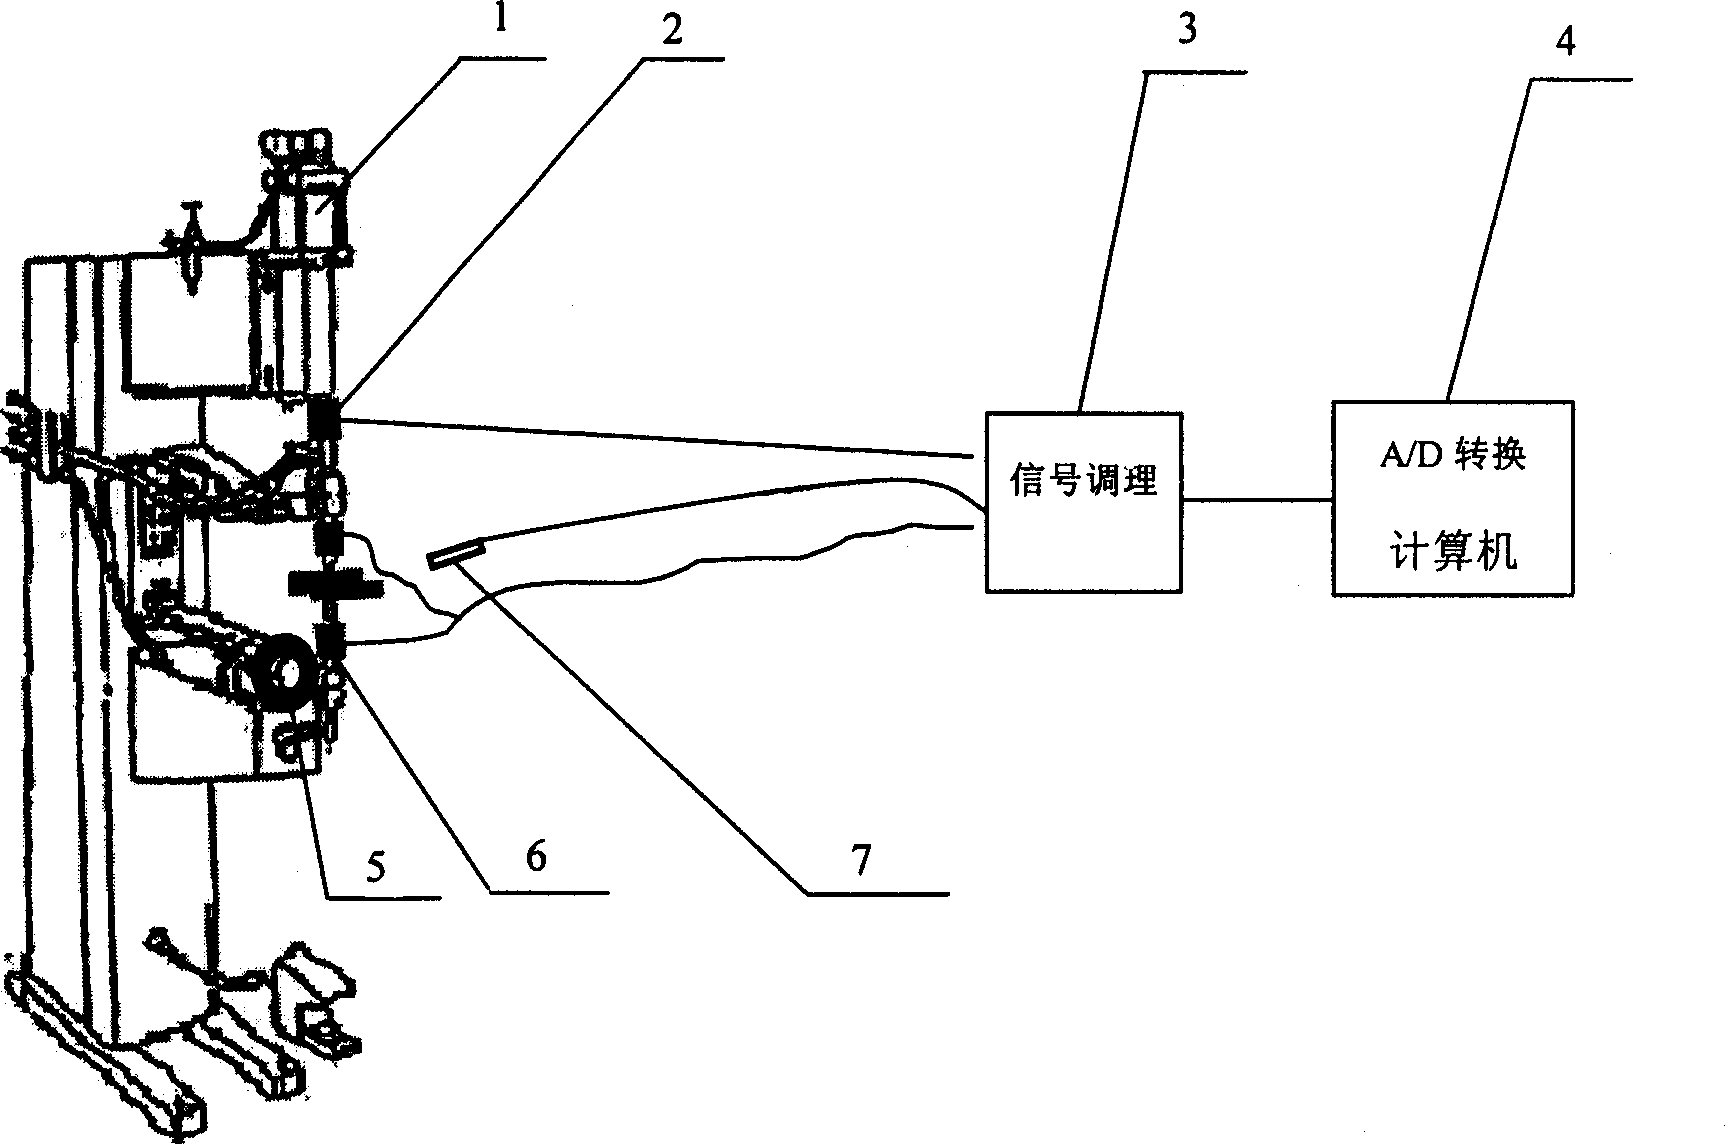 Method for determining fusion mugget area of resistance spot welding for allautal through technique of syncretizing multiple informations